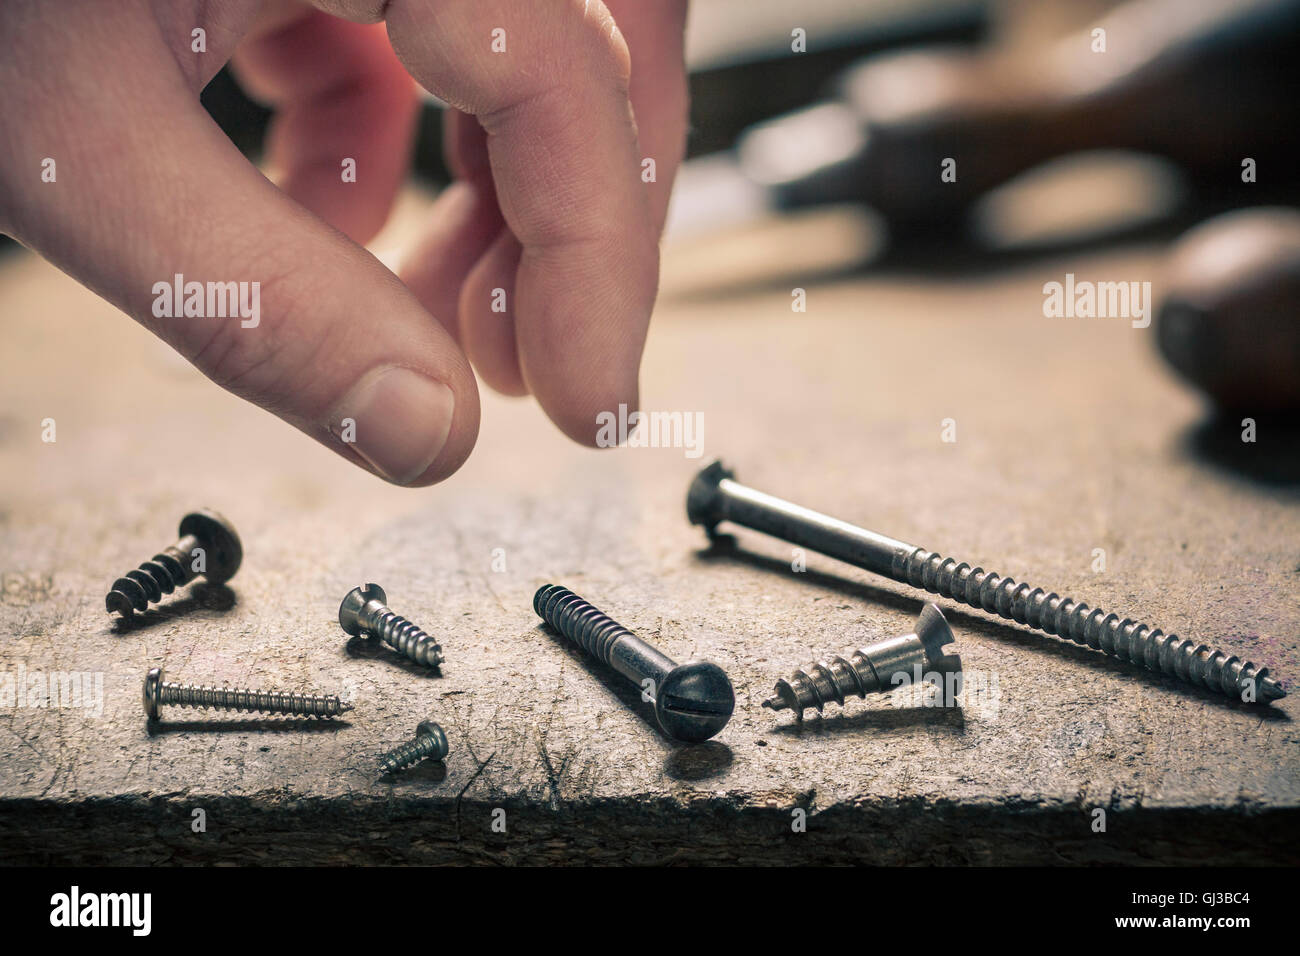 Close-up of hand above different sized screws Stock Photo